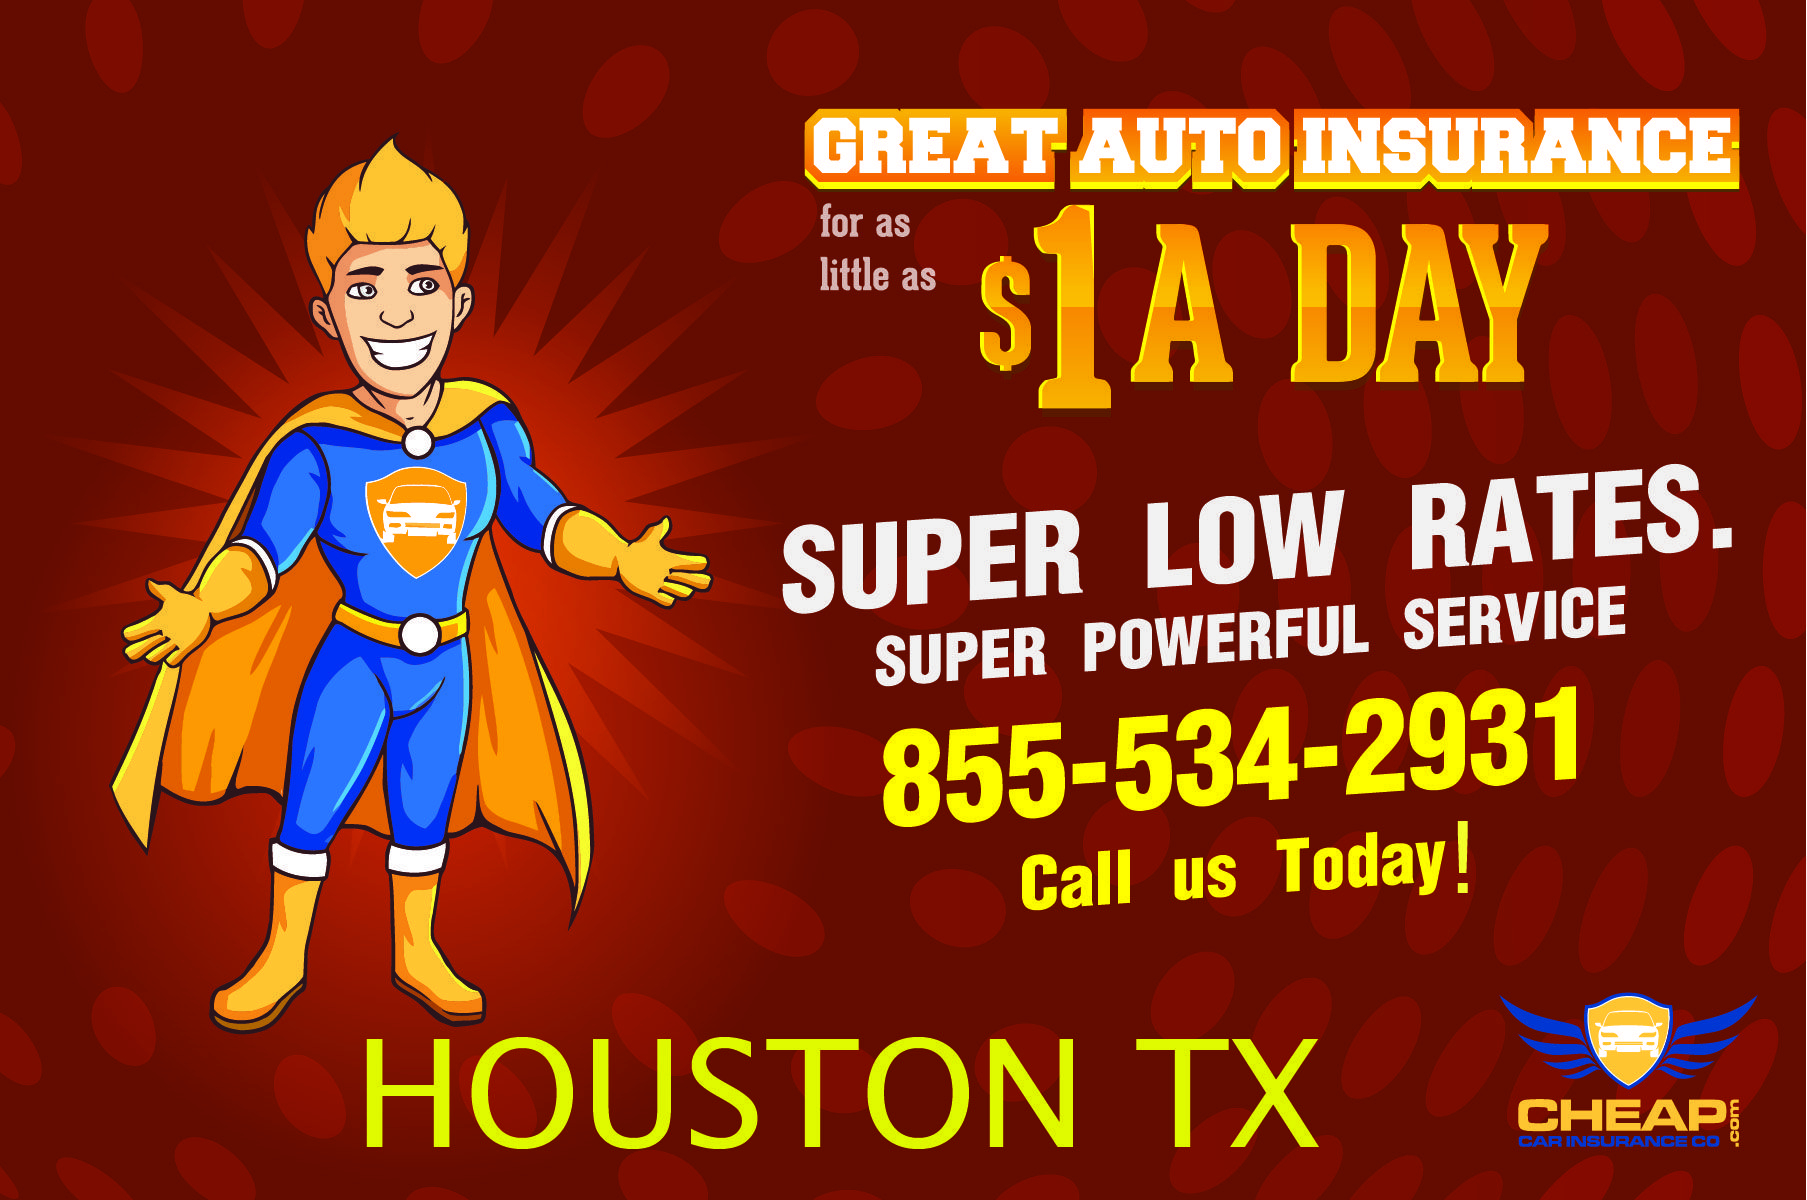 Affordable Auto Insurance Houston Texas We Offer The Best in dimensions 1807 X 1200